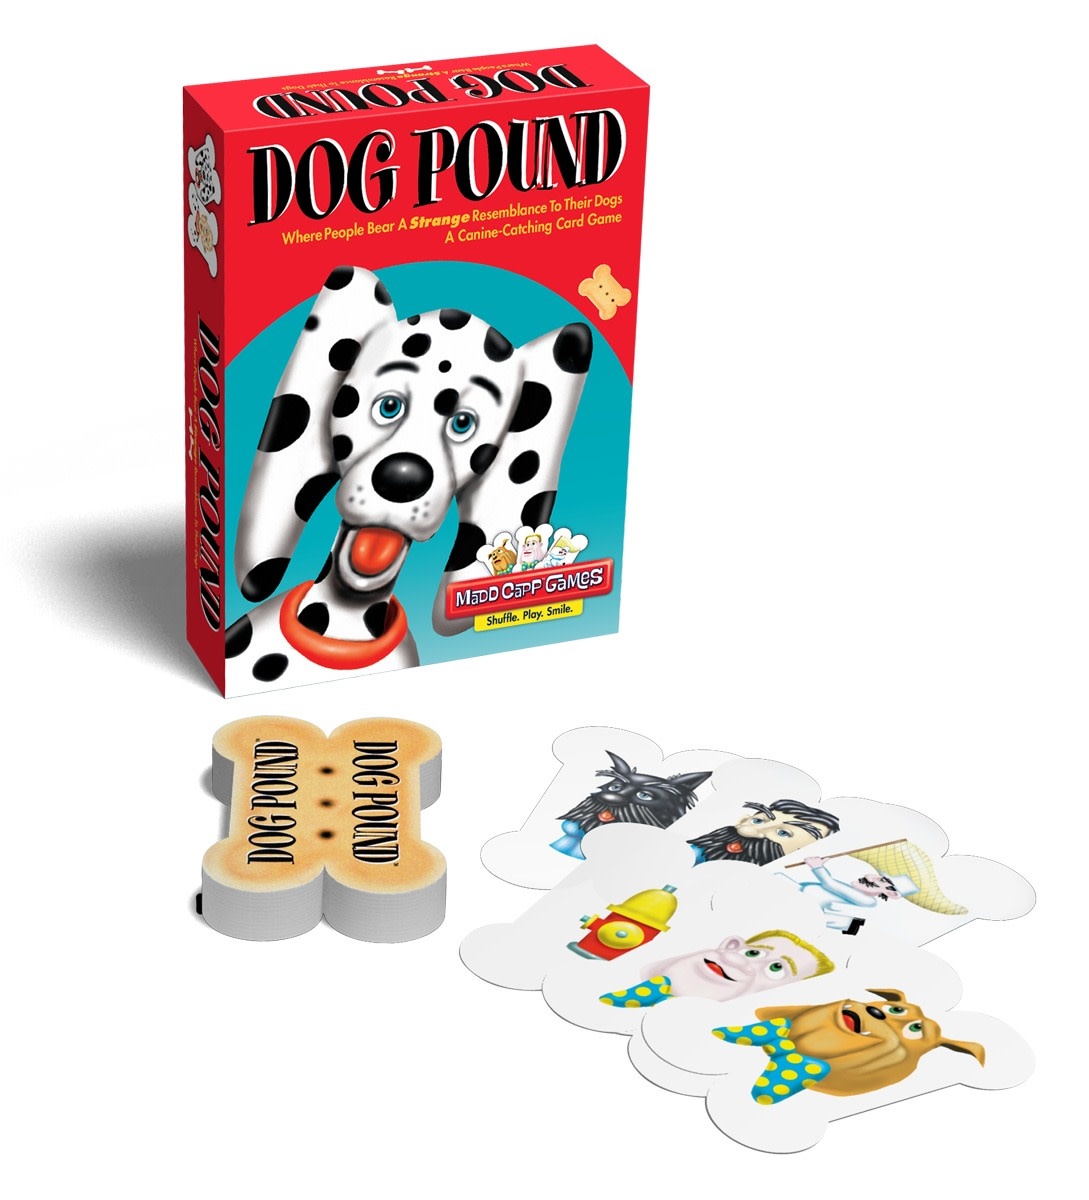 Madd Capp Games & Puzzles Madd Capp Card Games - Dog Pound